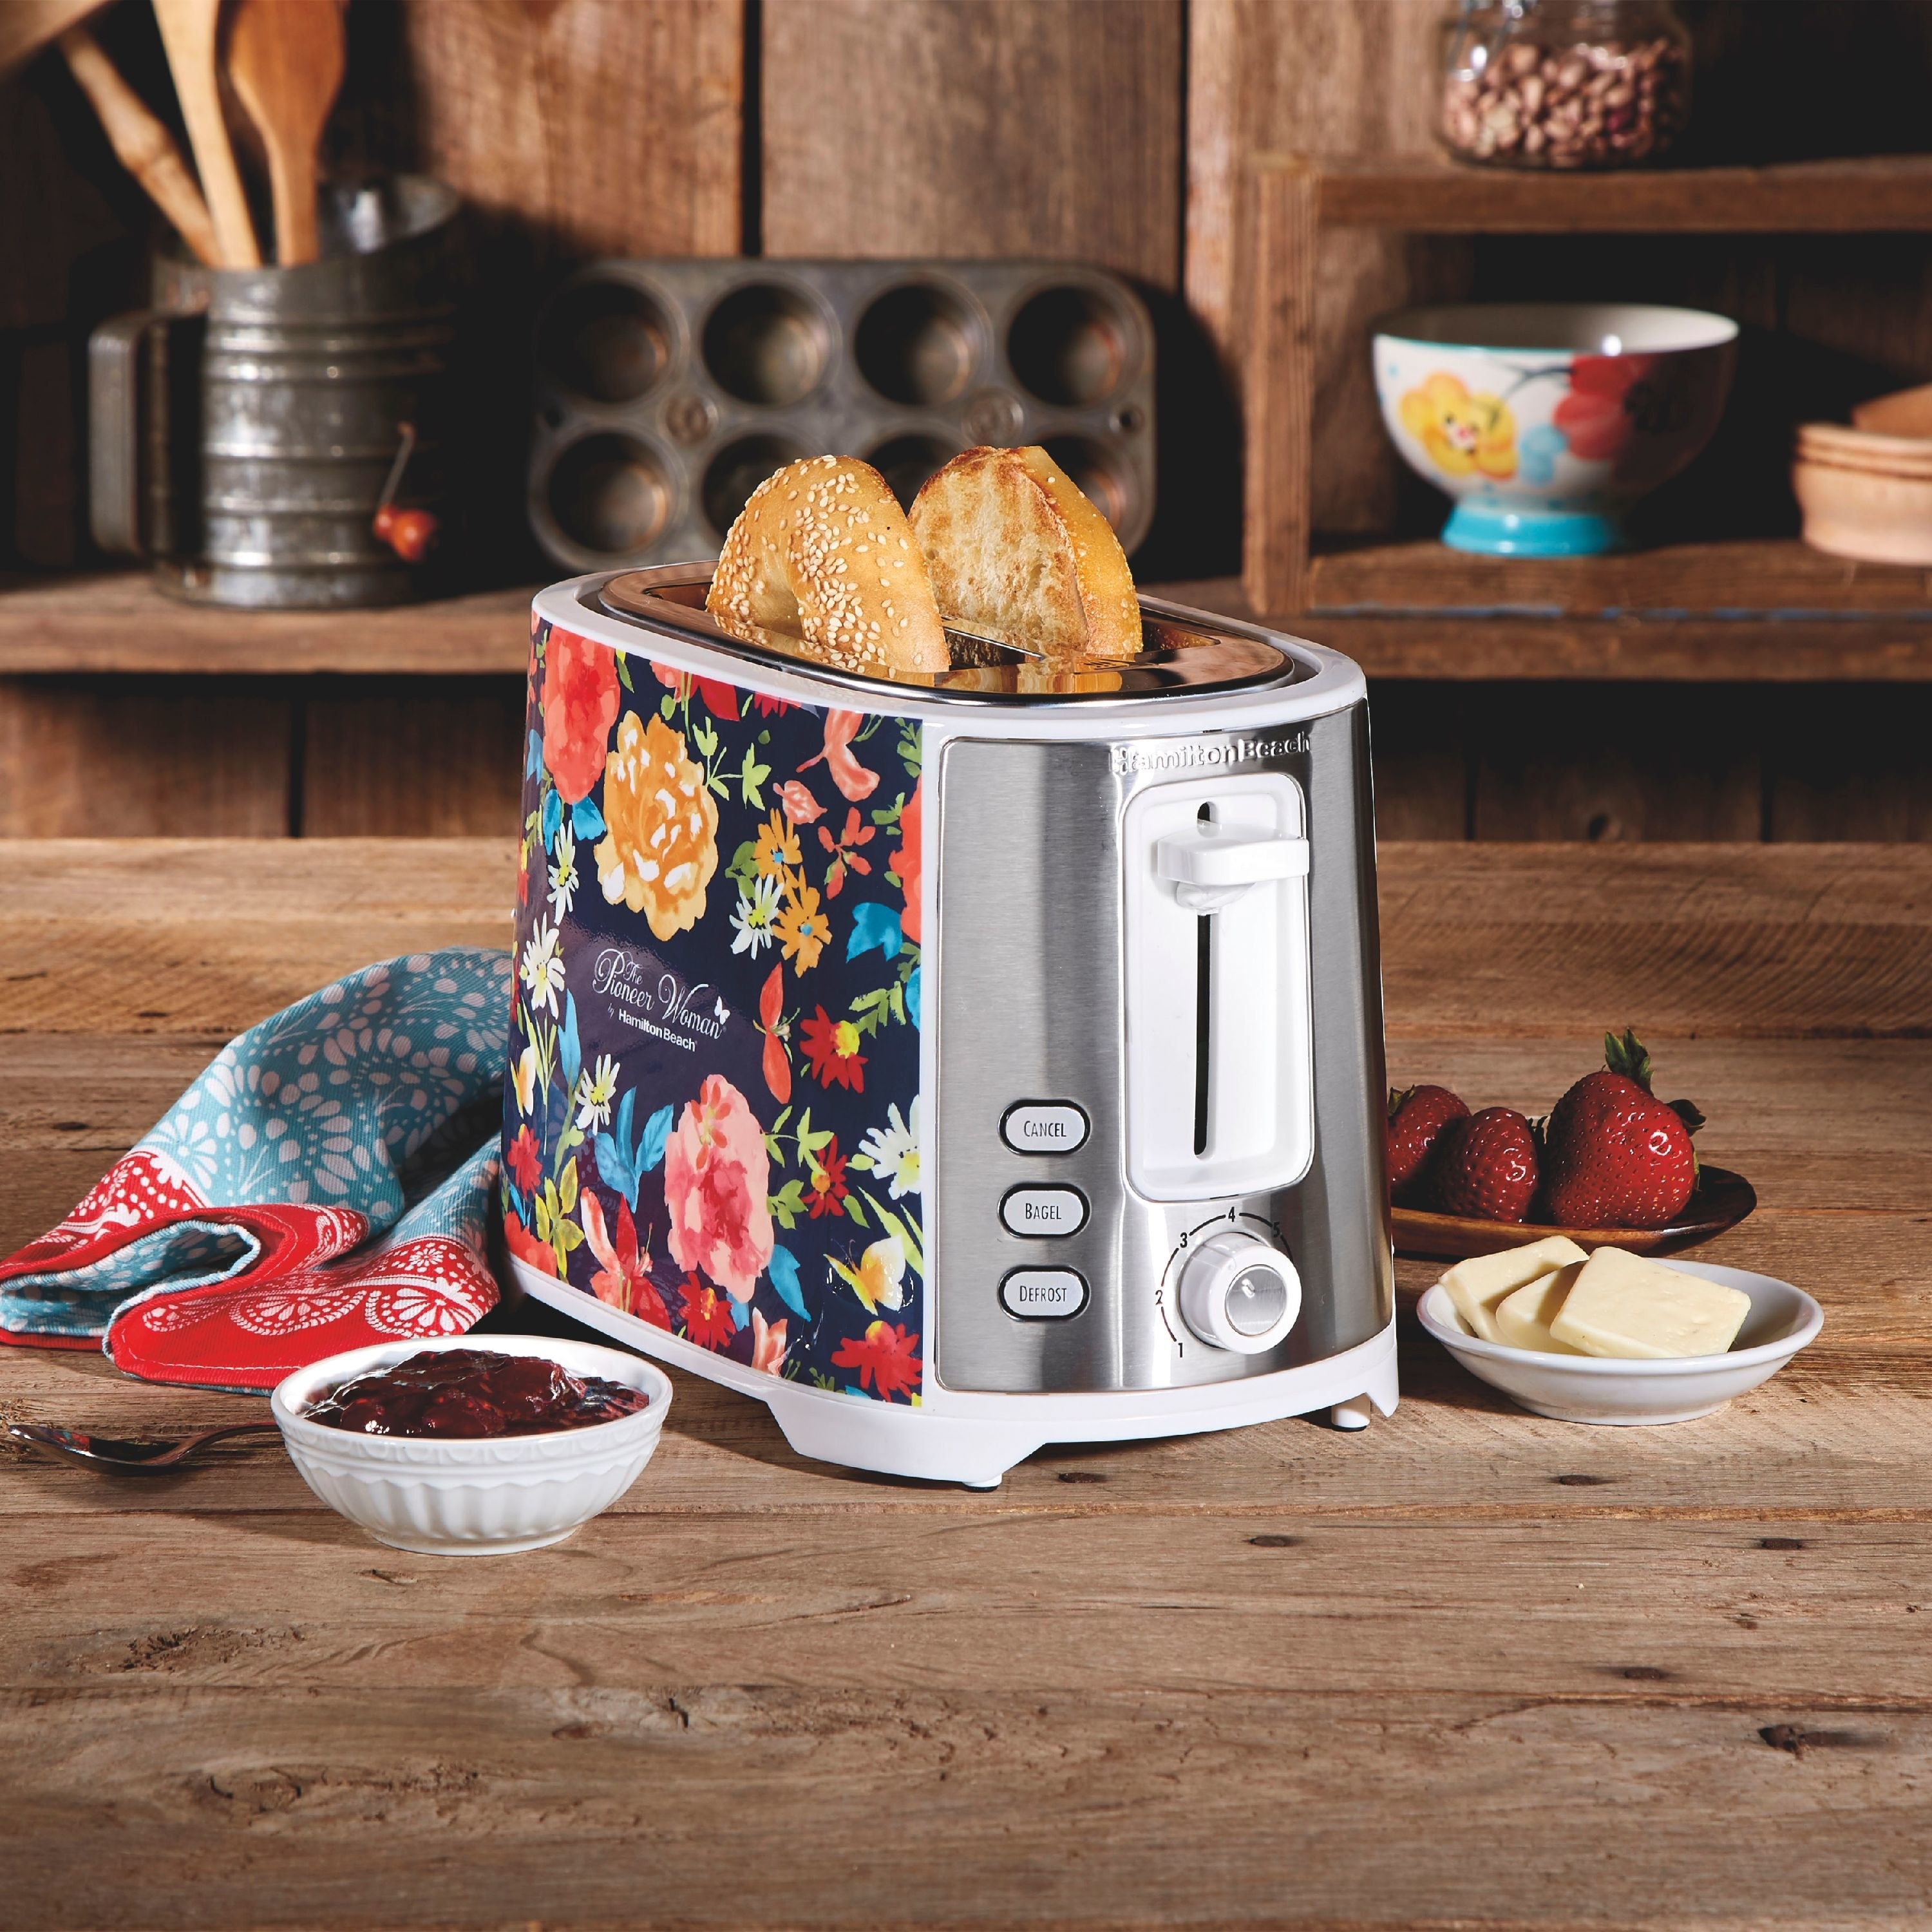 The toaster, which has two bread slots, and side panels with floral patterns